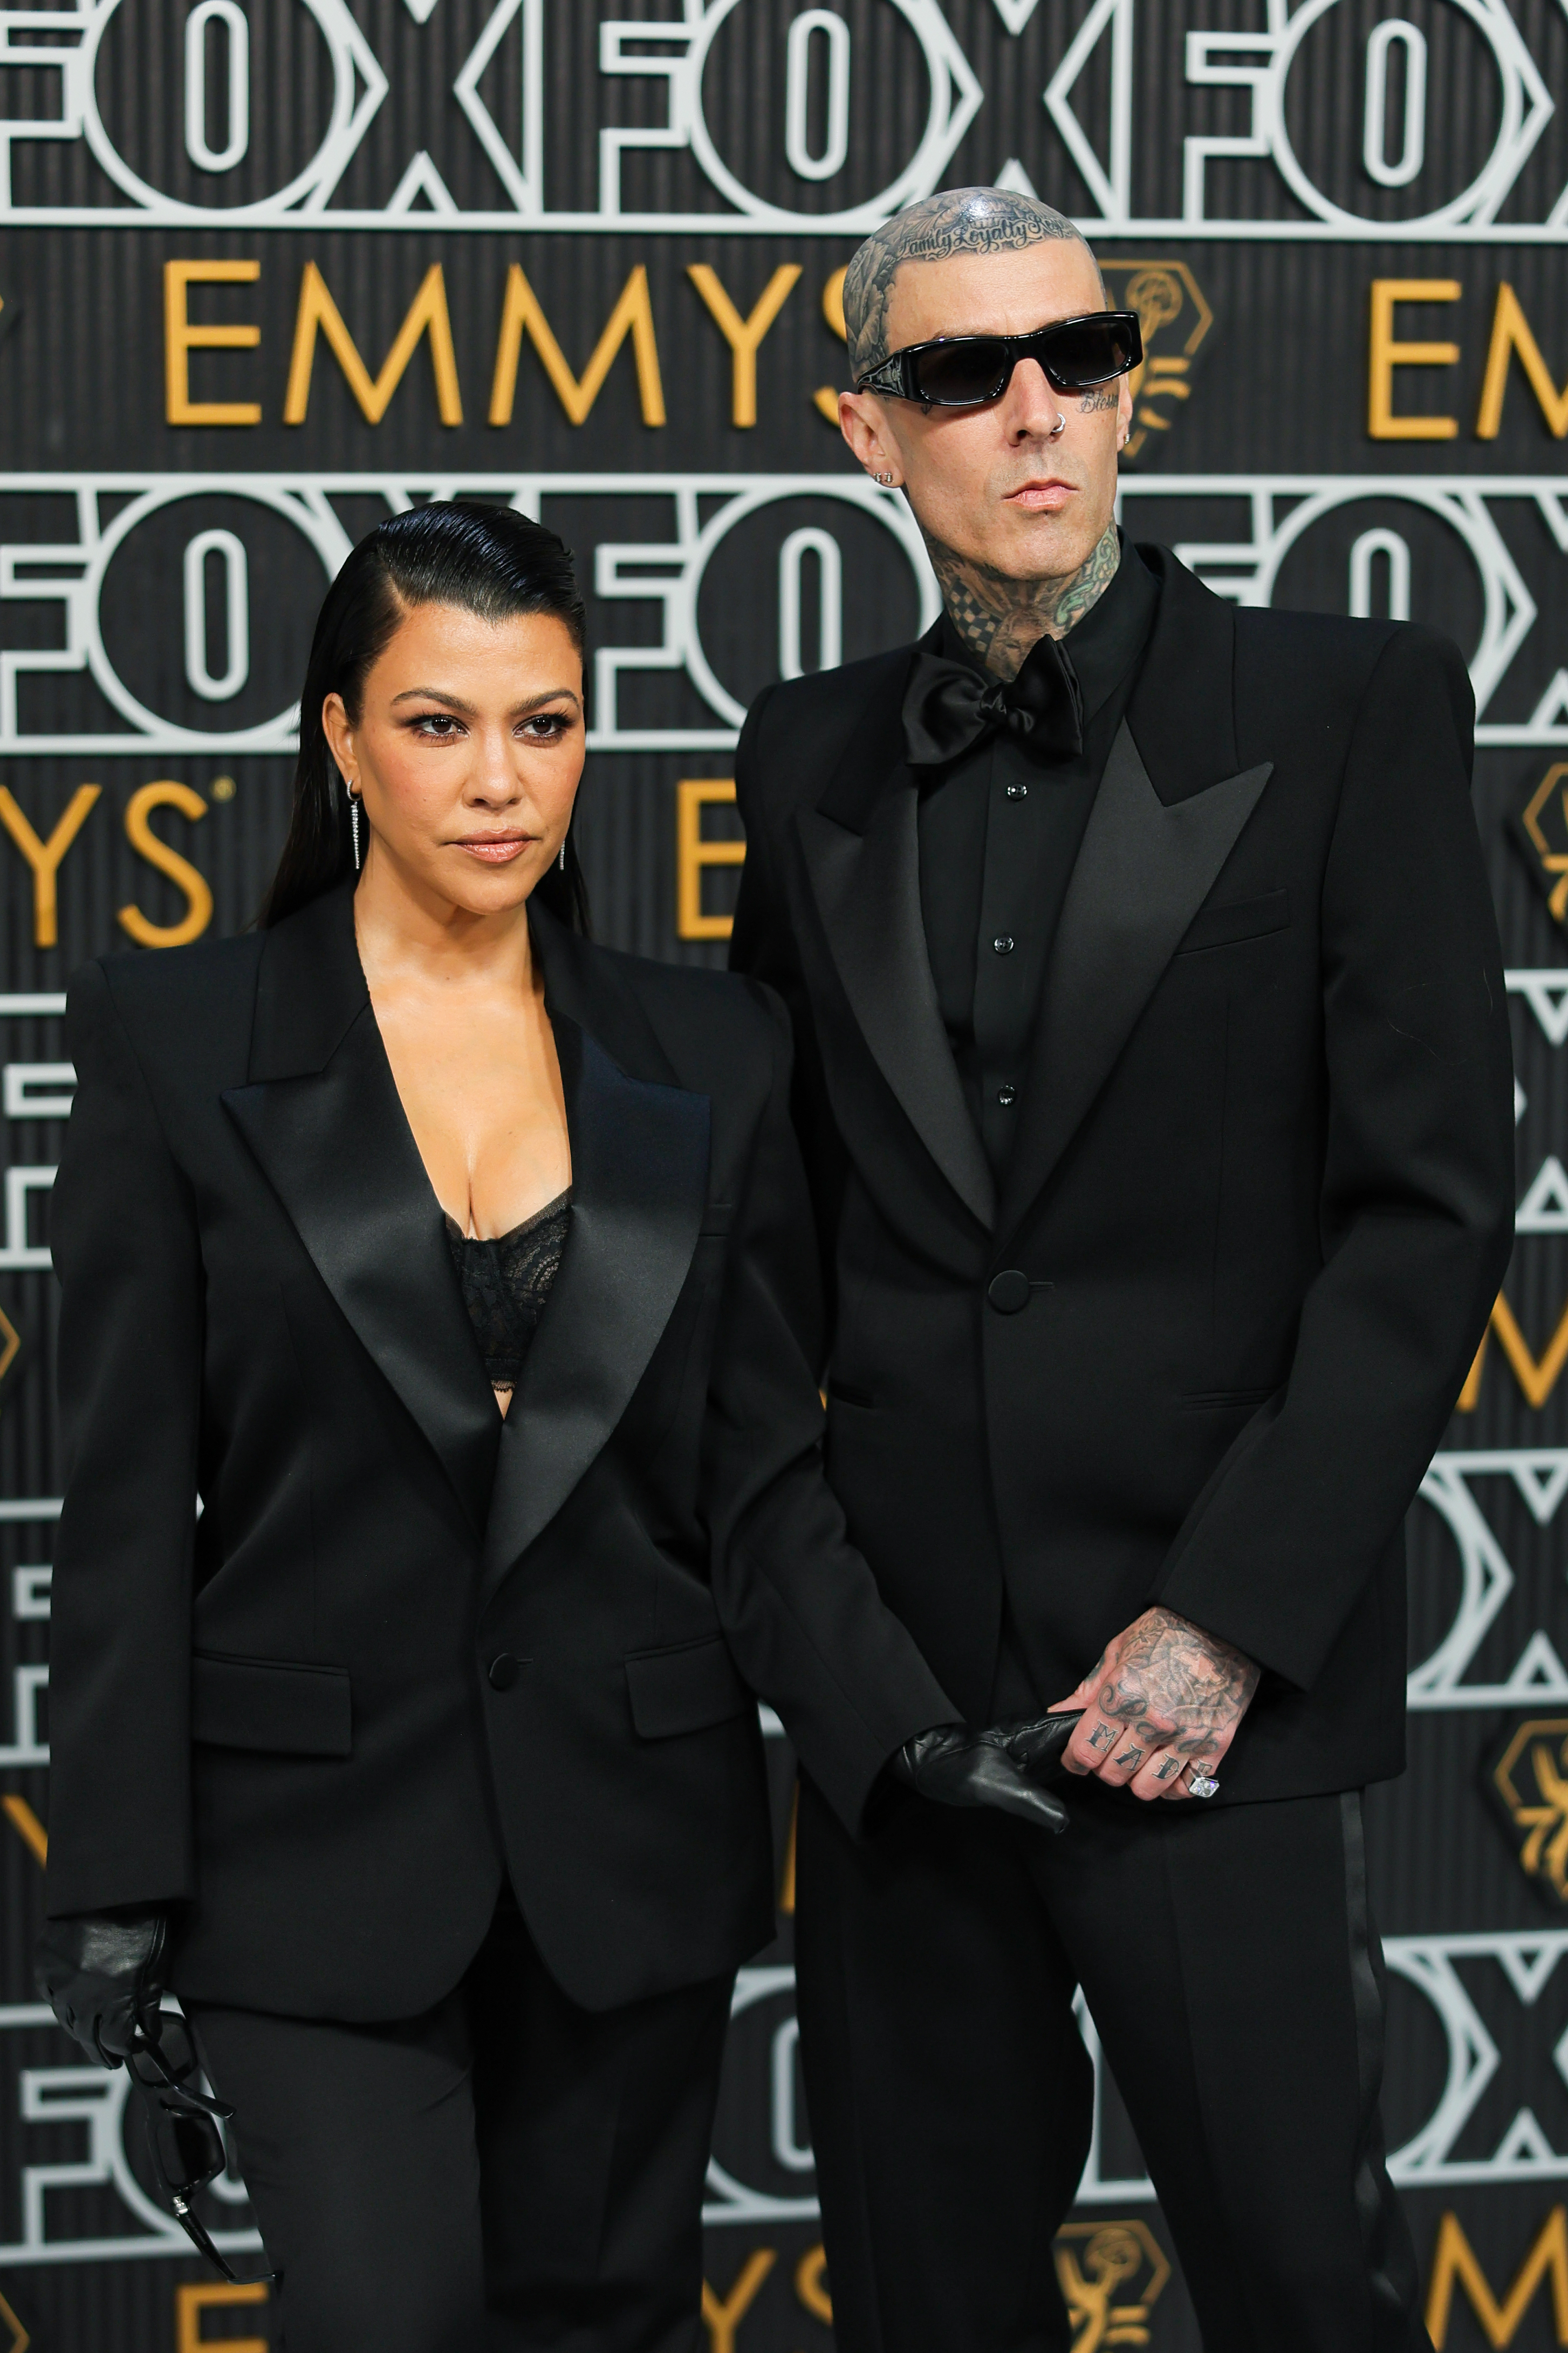 Two individuals posing on the Emmy&#x27;s red carpet; one in a black suit and the other in a dress suit with plunging neckline